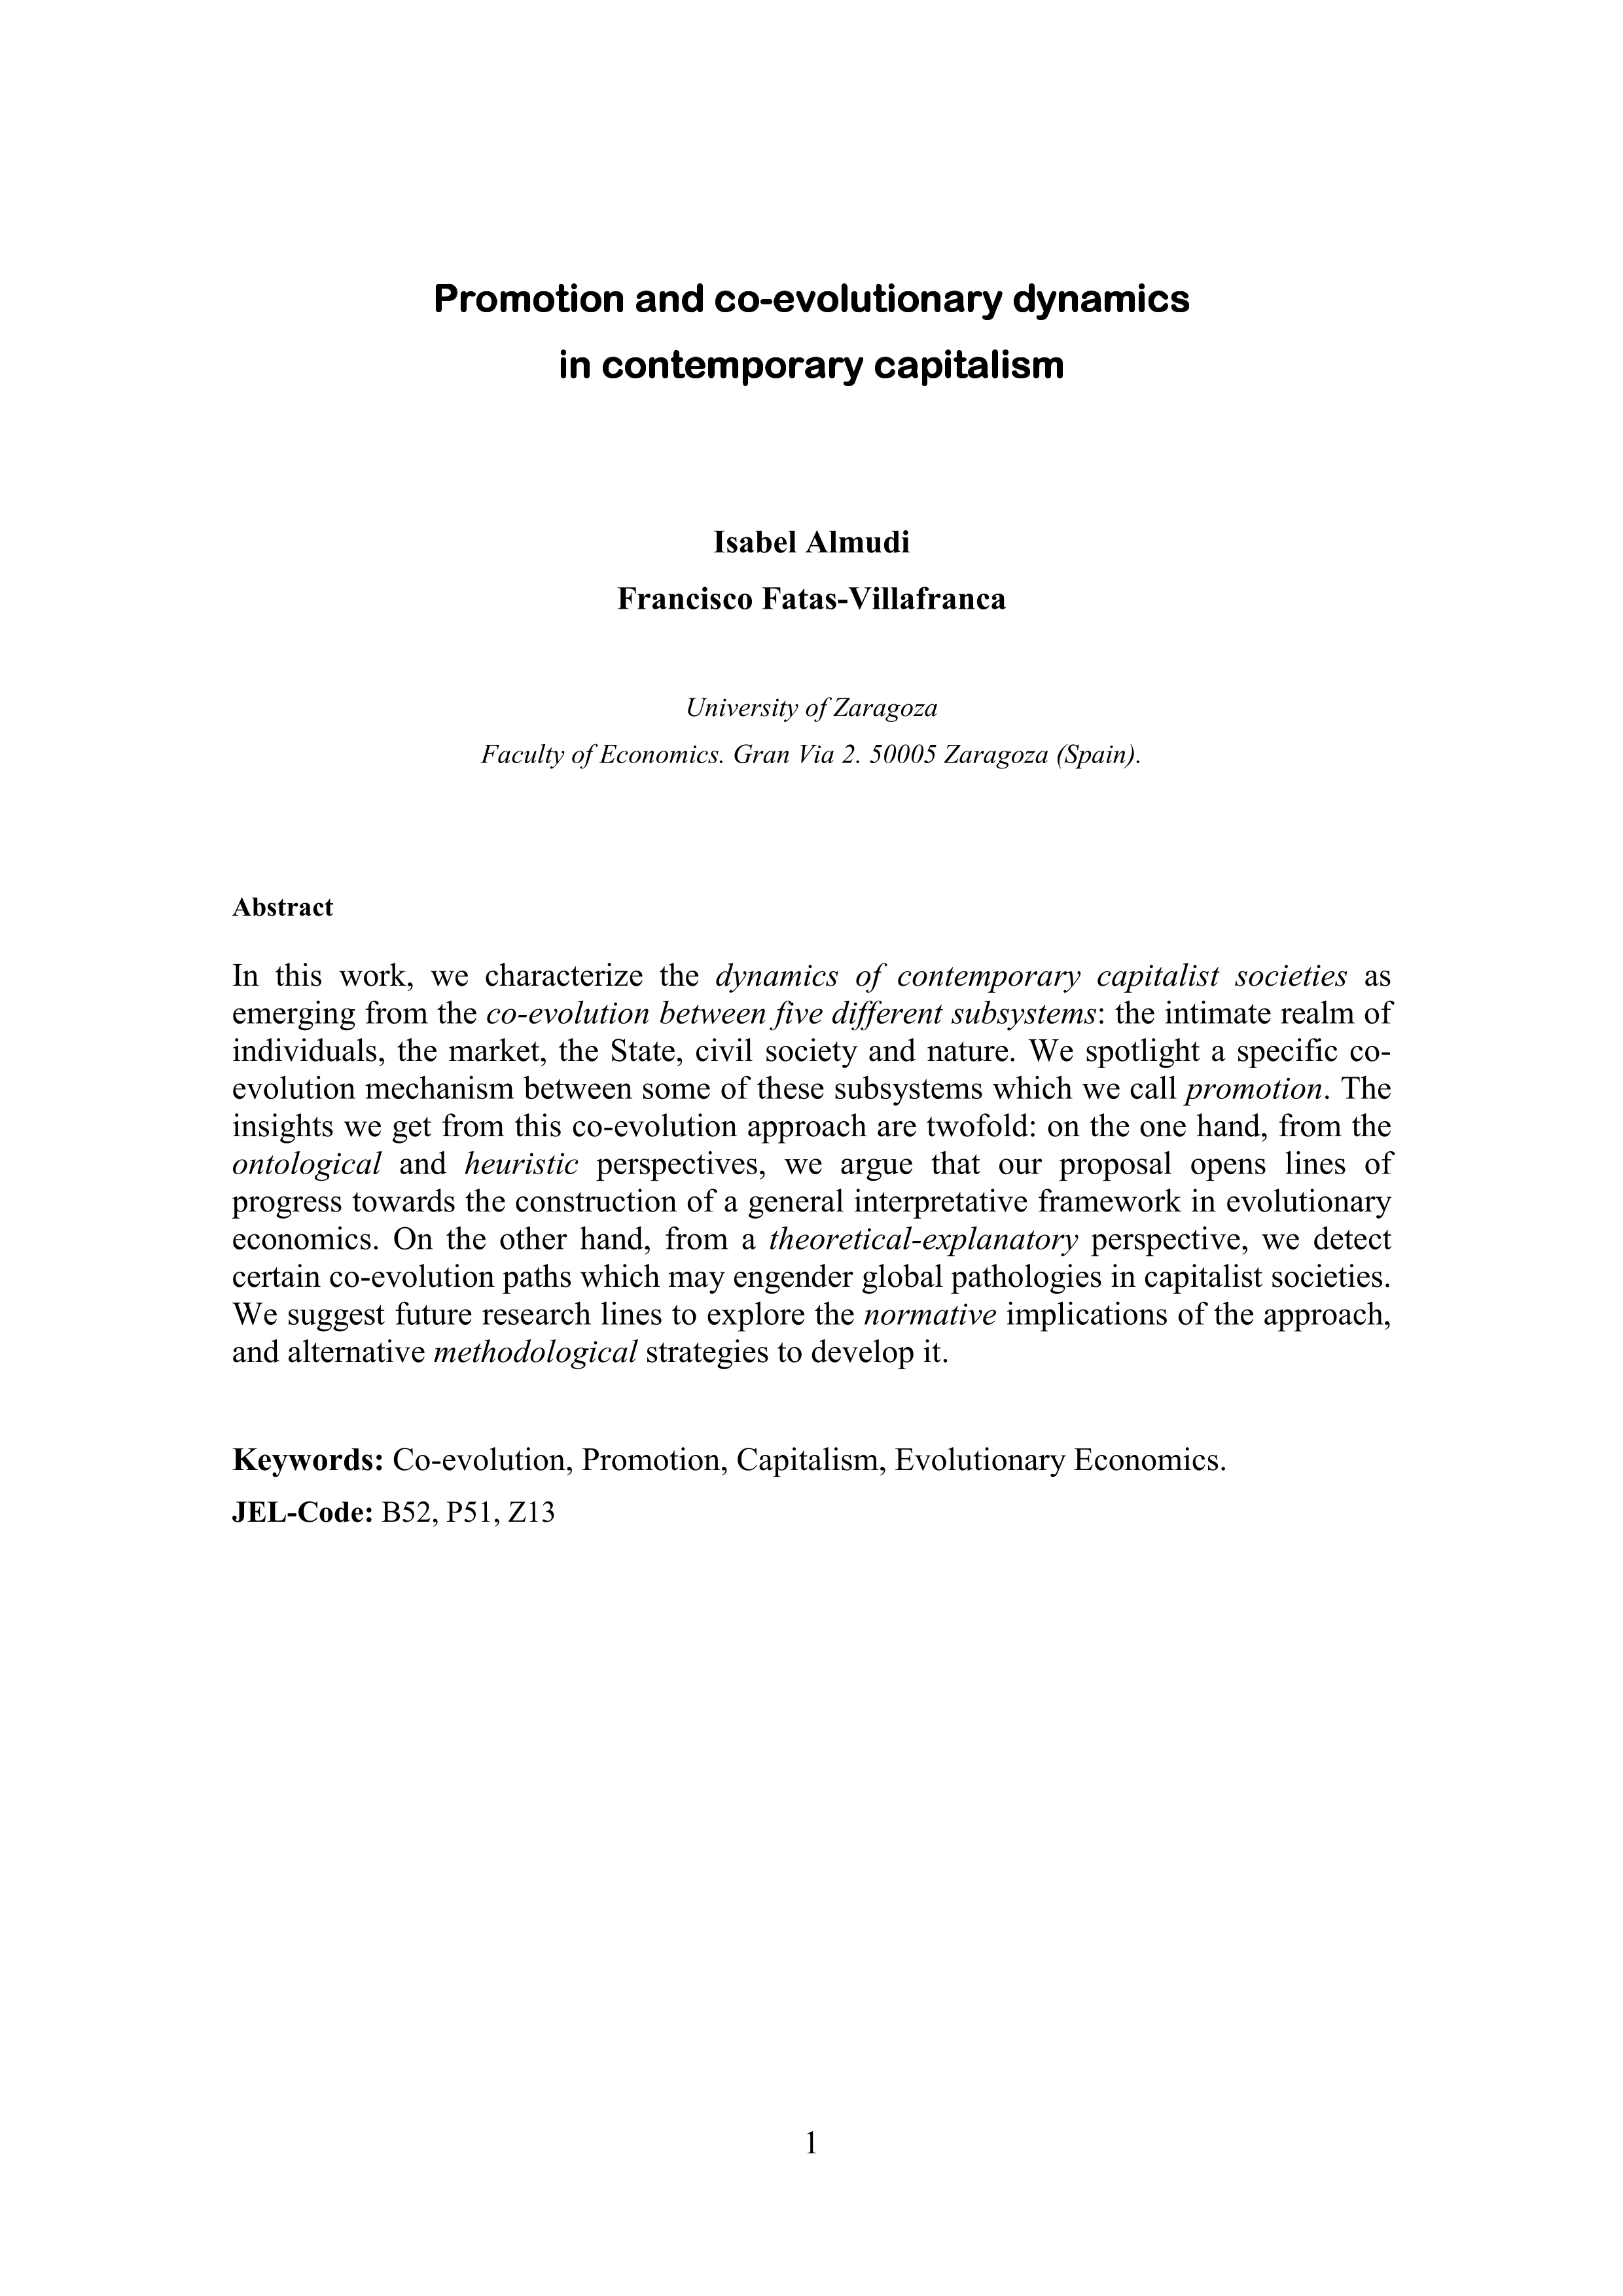 Promotion and coevolutionary dynamics in contemporary capitalism